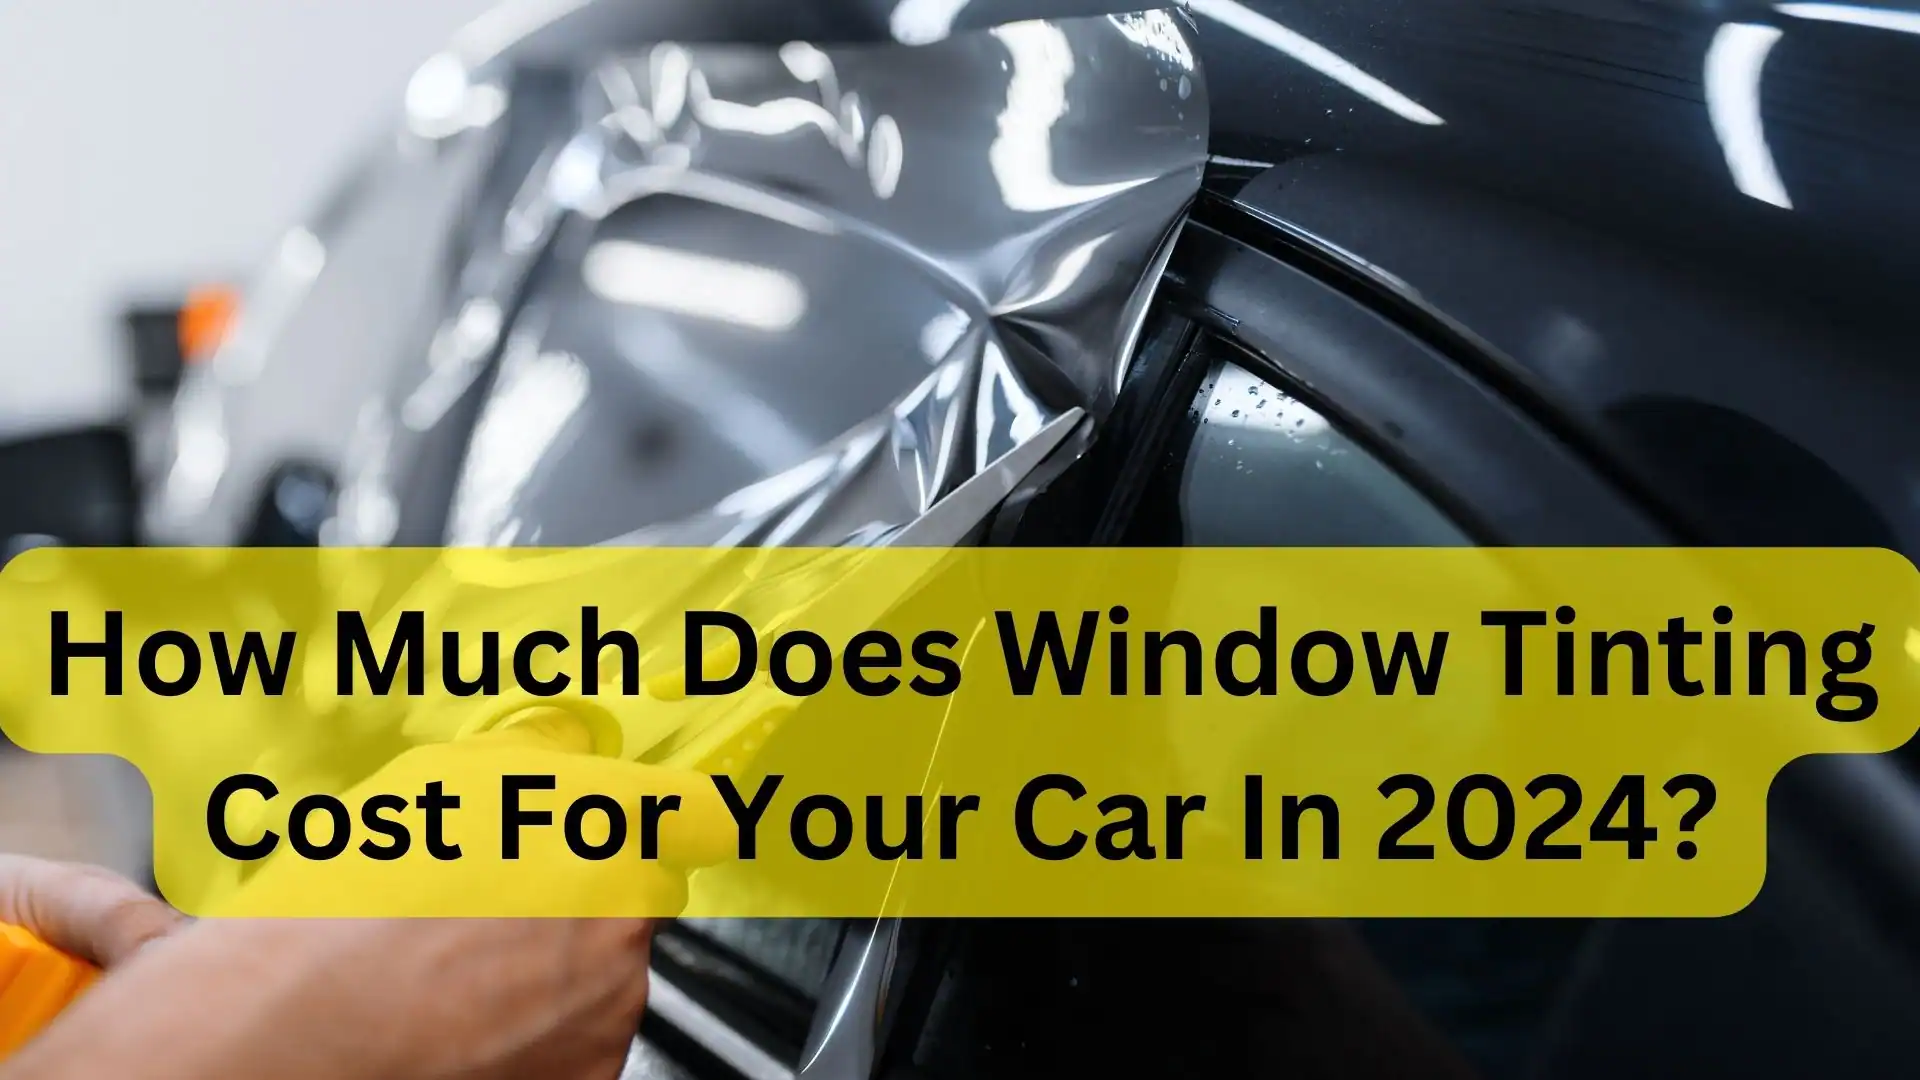 How Much Does Window Tinting Cost For Your Car In 2024?